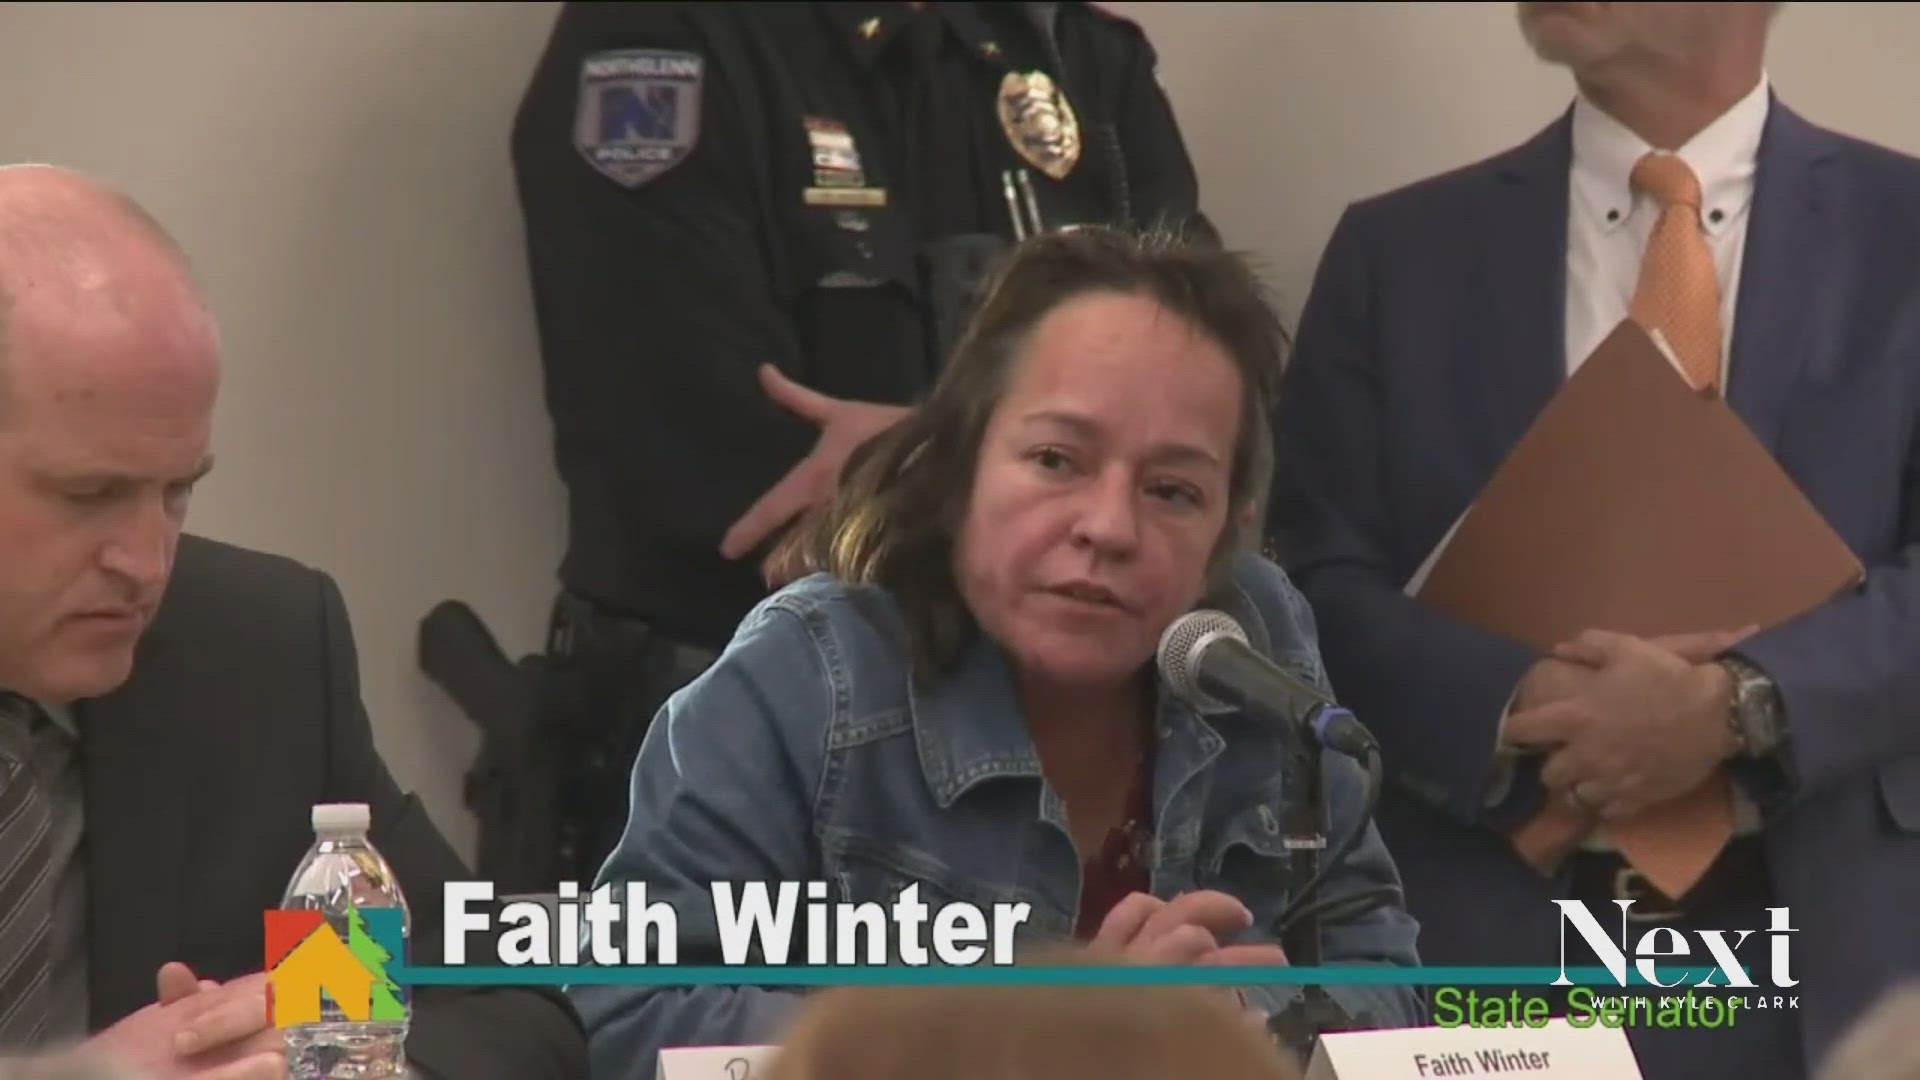 Democratic State Senator Faith Winter may face an ethics complaint from the City of Northglenn for showing up drunk to a public meeting there.